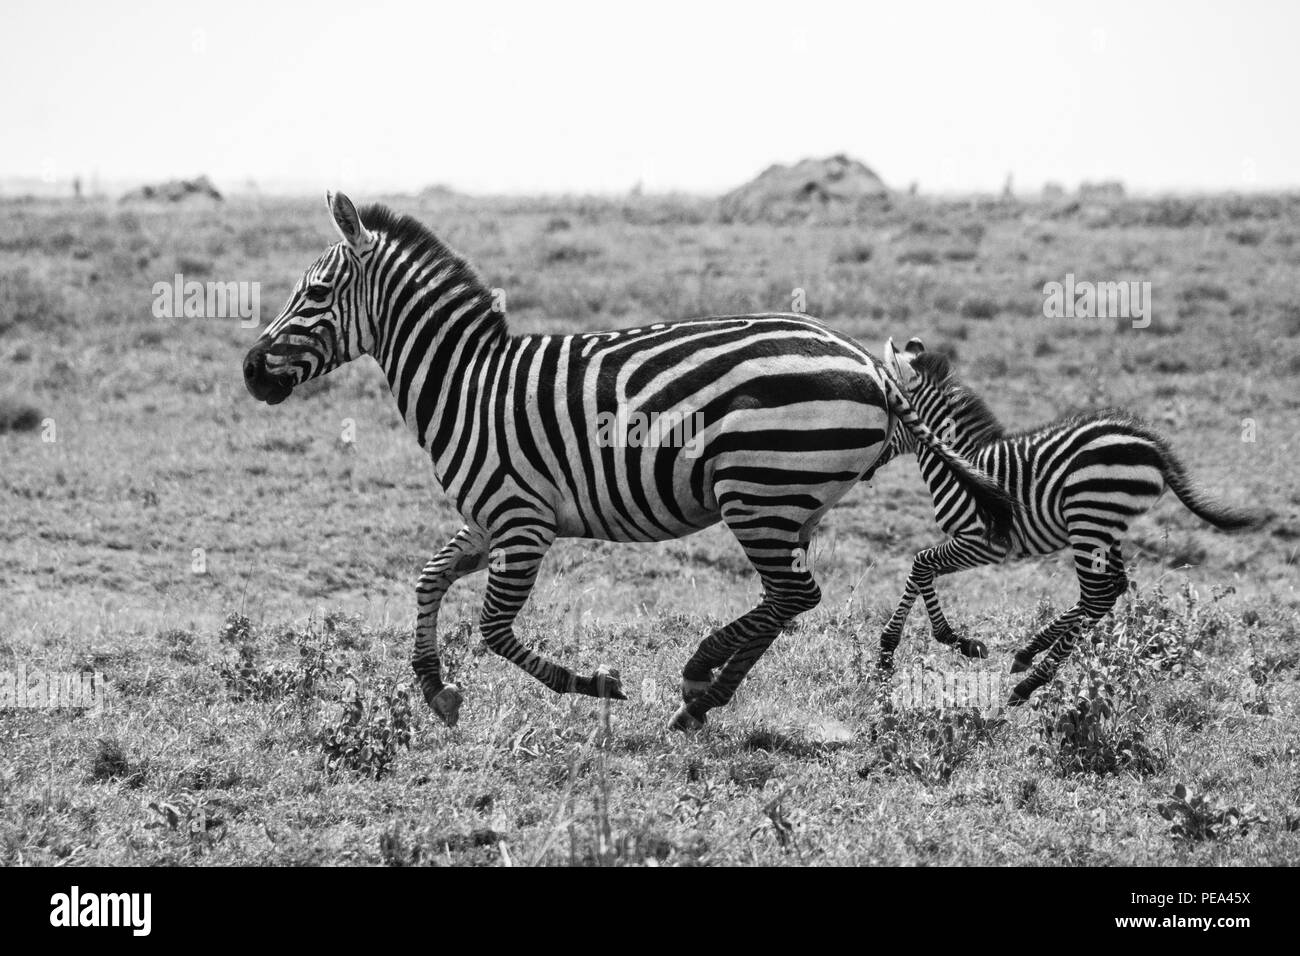 Mother and baby Zebras racing together in the plains of Serengeti national Park, Tanzania. Stock Photo